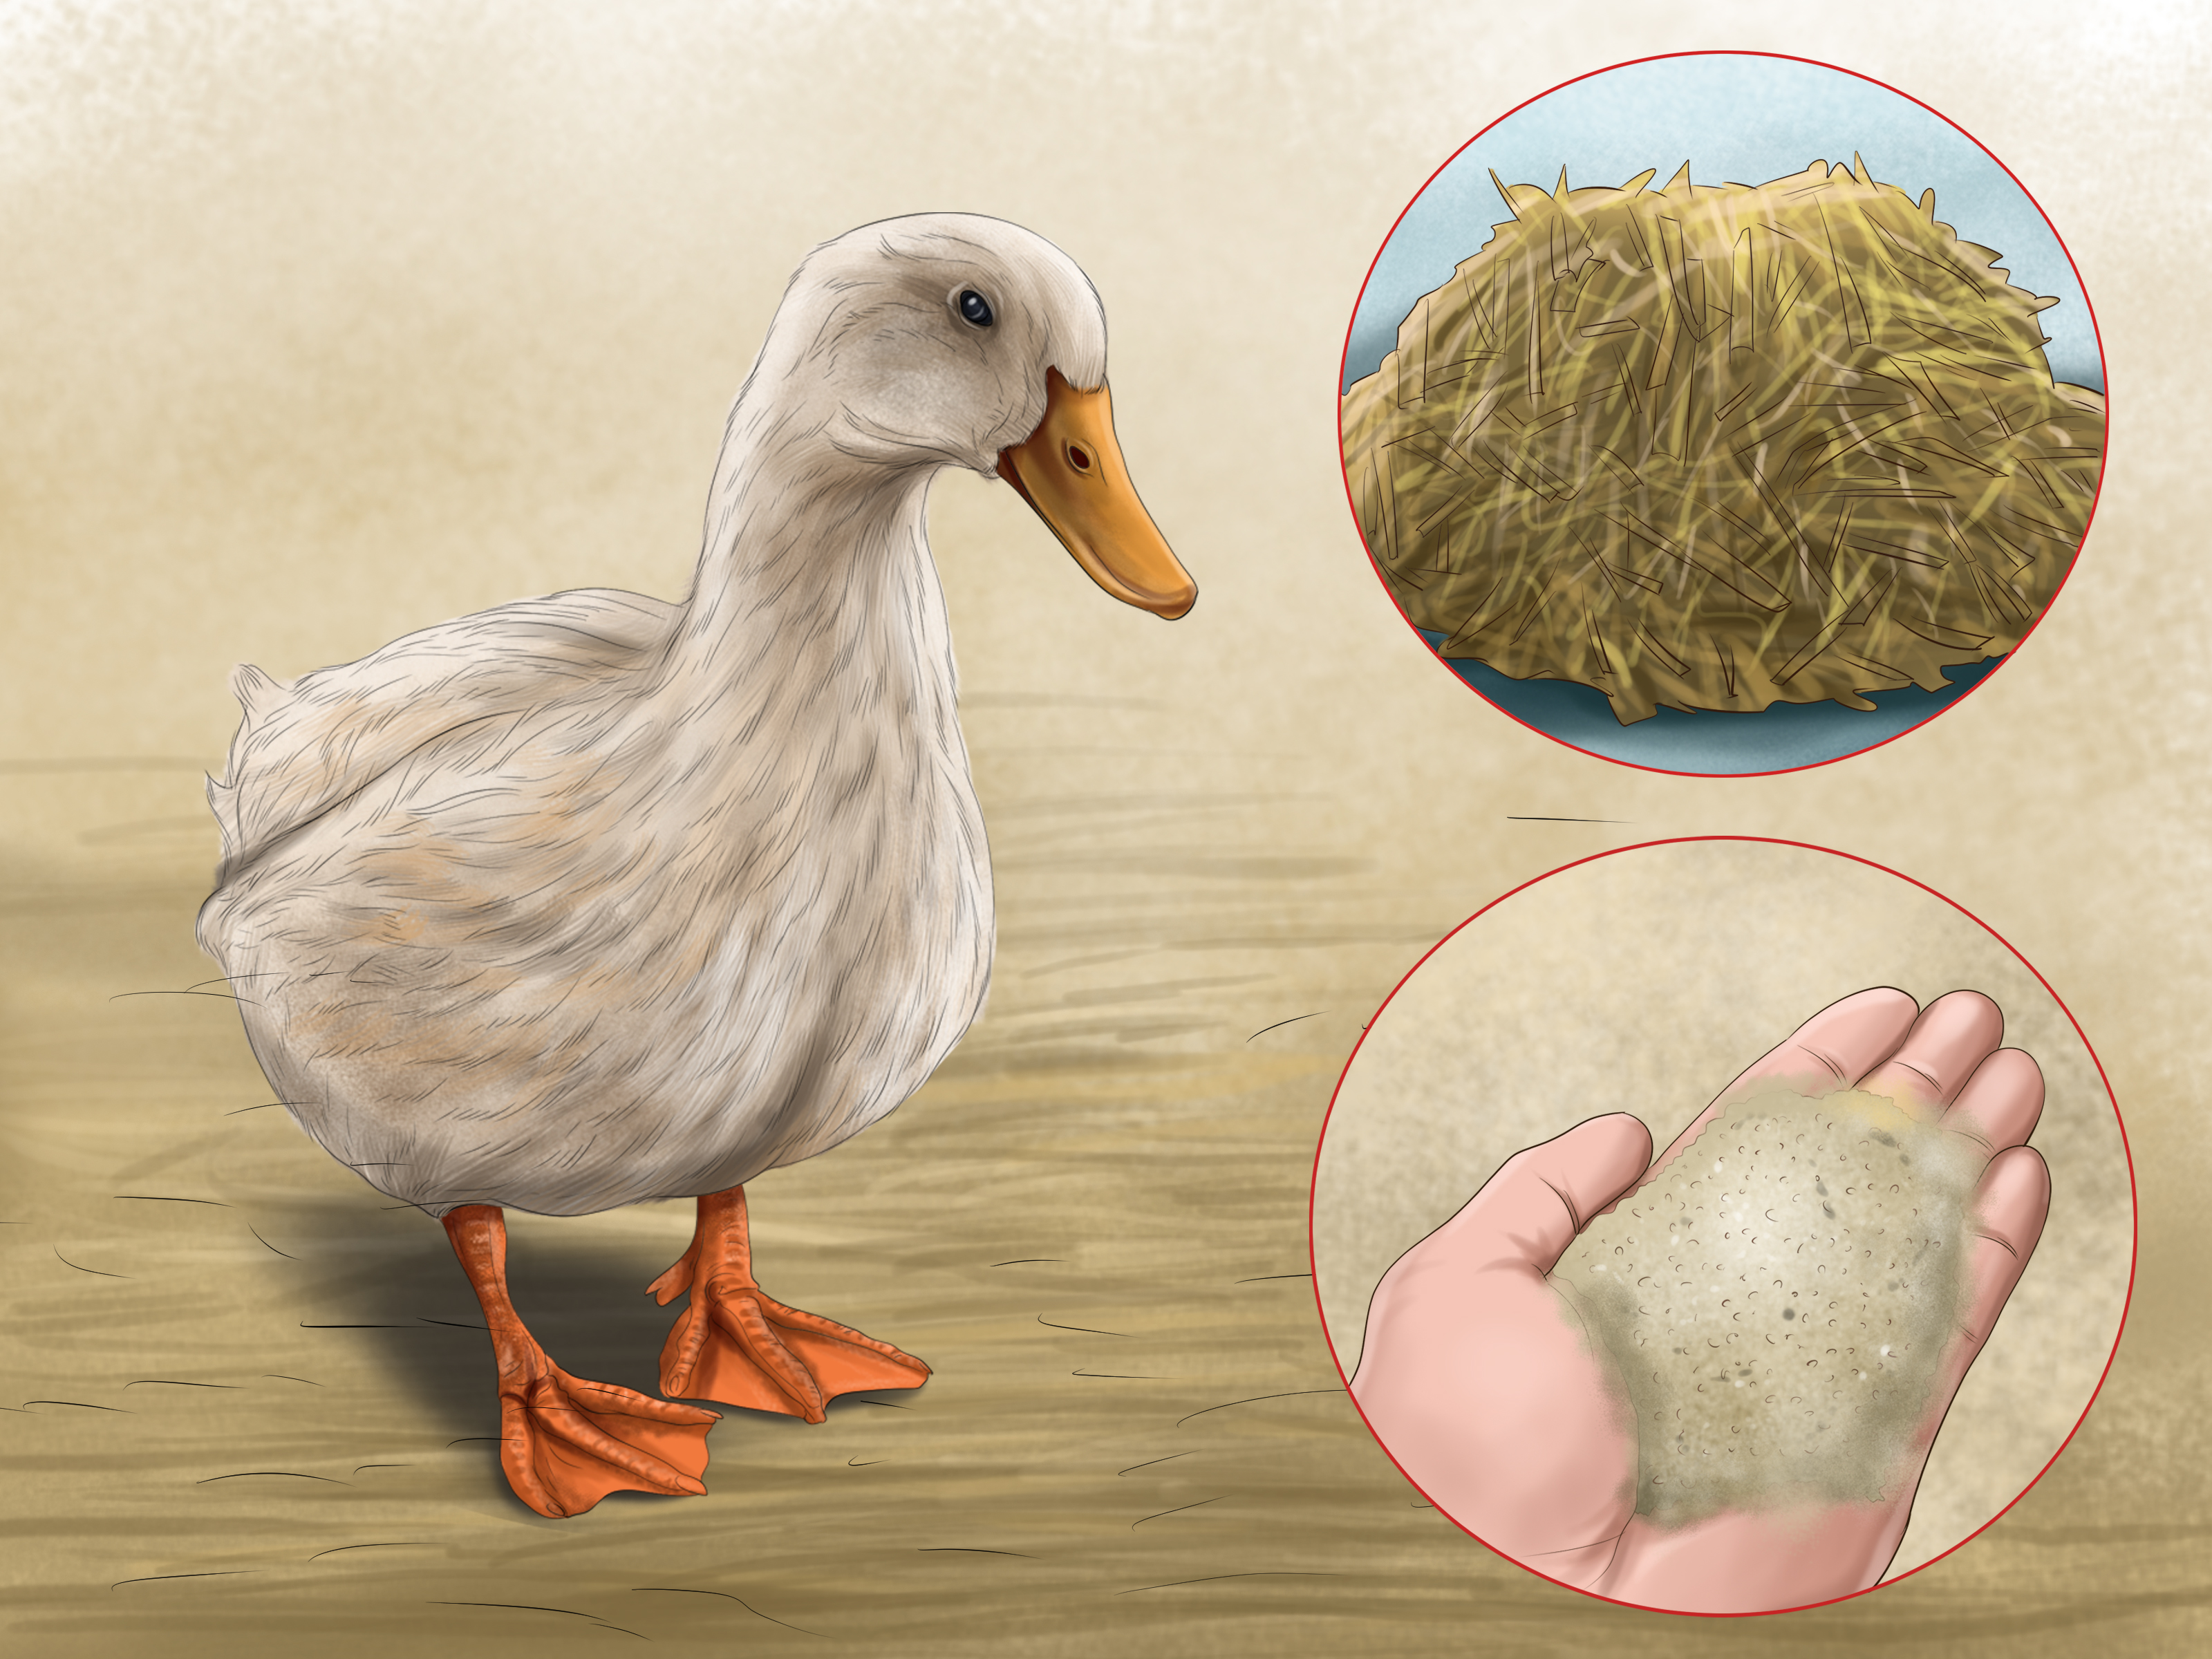 3 Ways to Attract Ducks - wikiHow